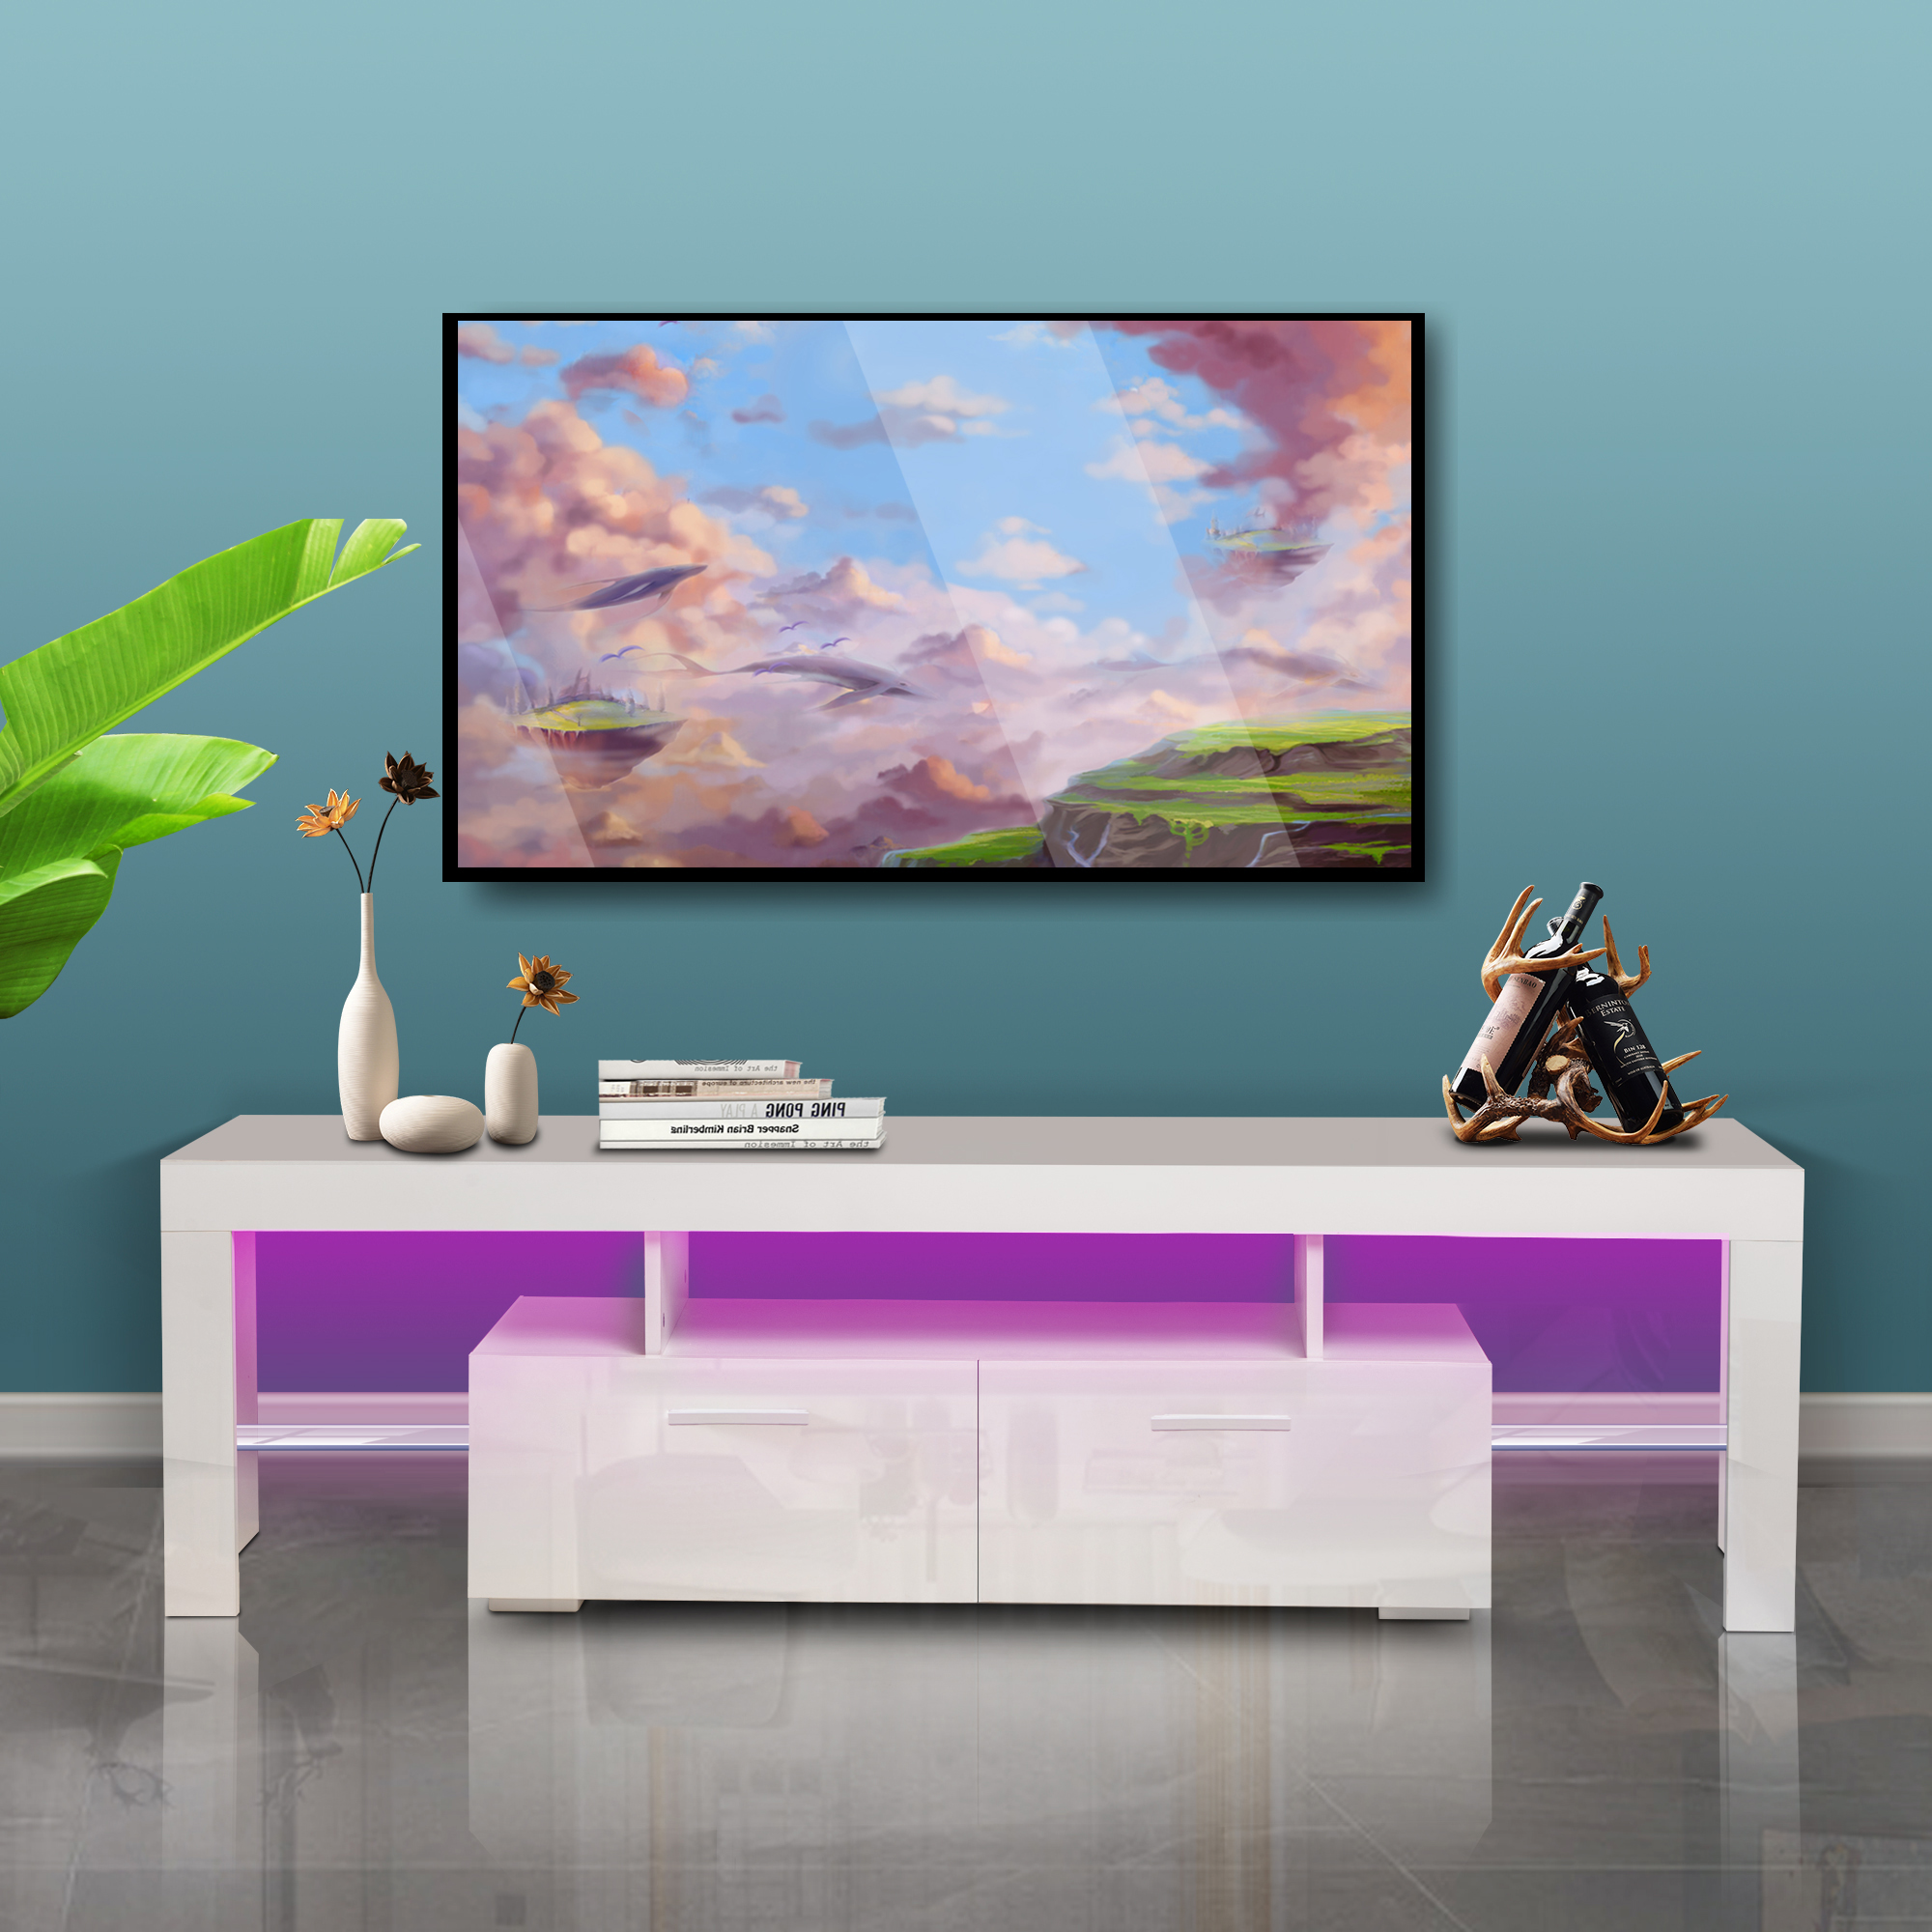 20 minutes quick assemble,White morden TV Stand with LED Lights,high glossy front TV Cabinet,can be assembled in Lounge Room, Living Room or Bedroom,color:WHITE-Boyel Living